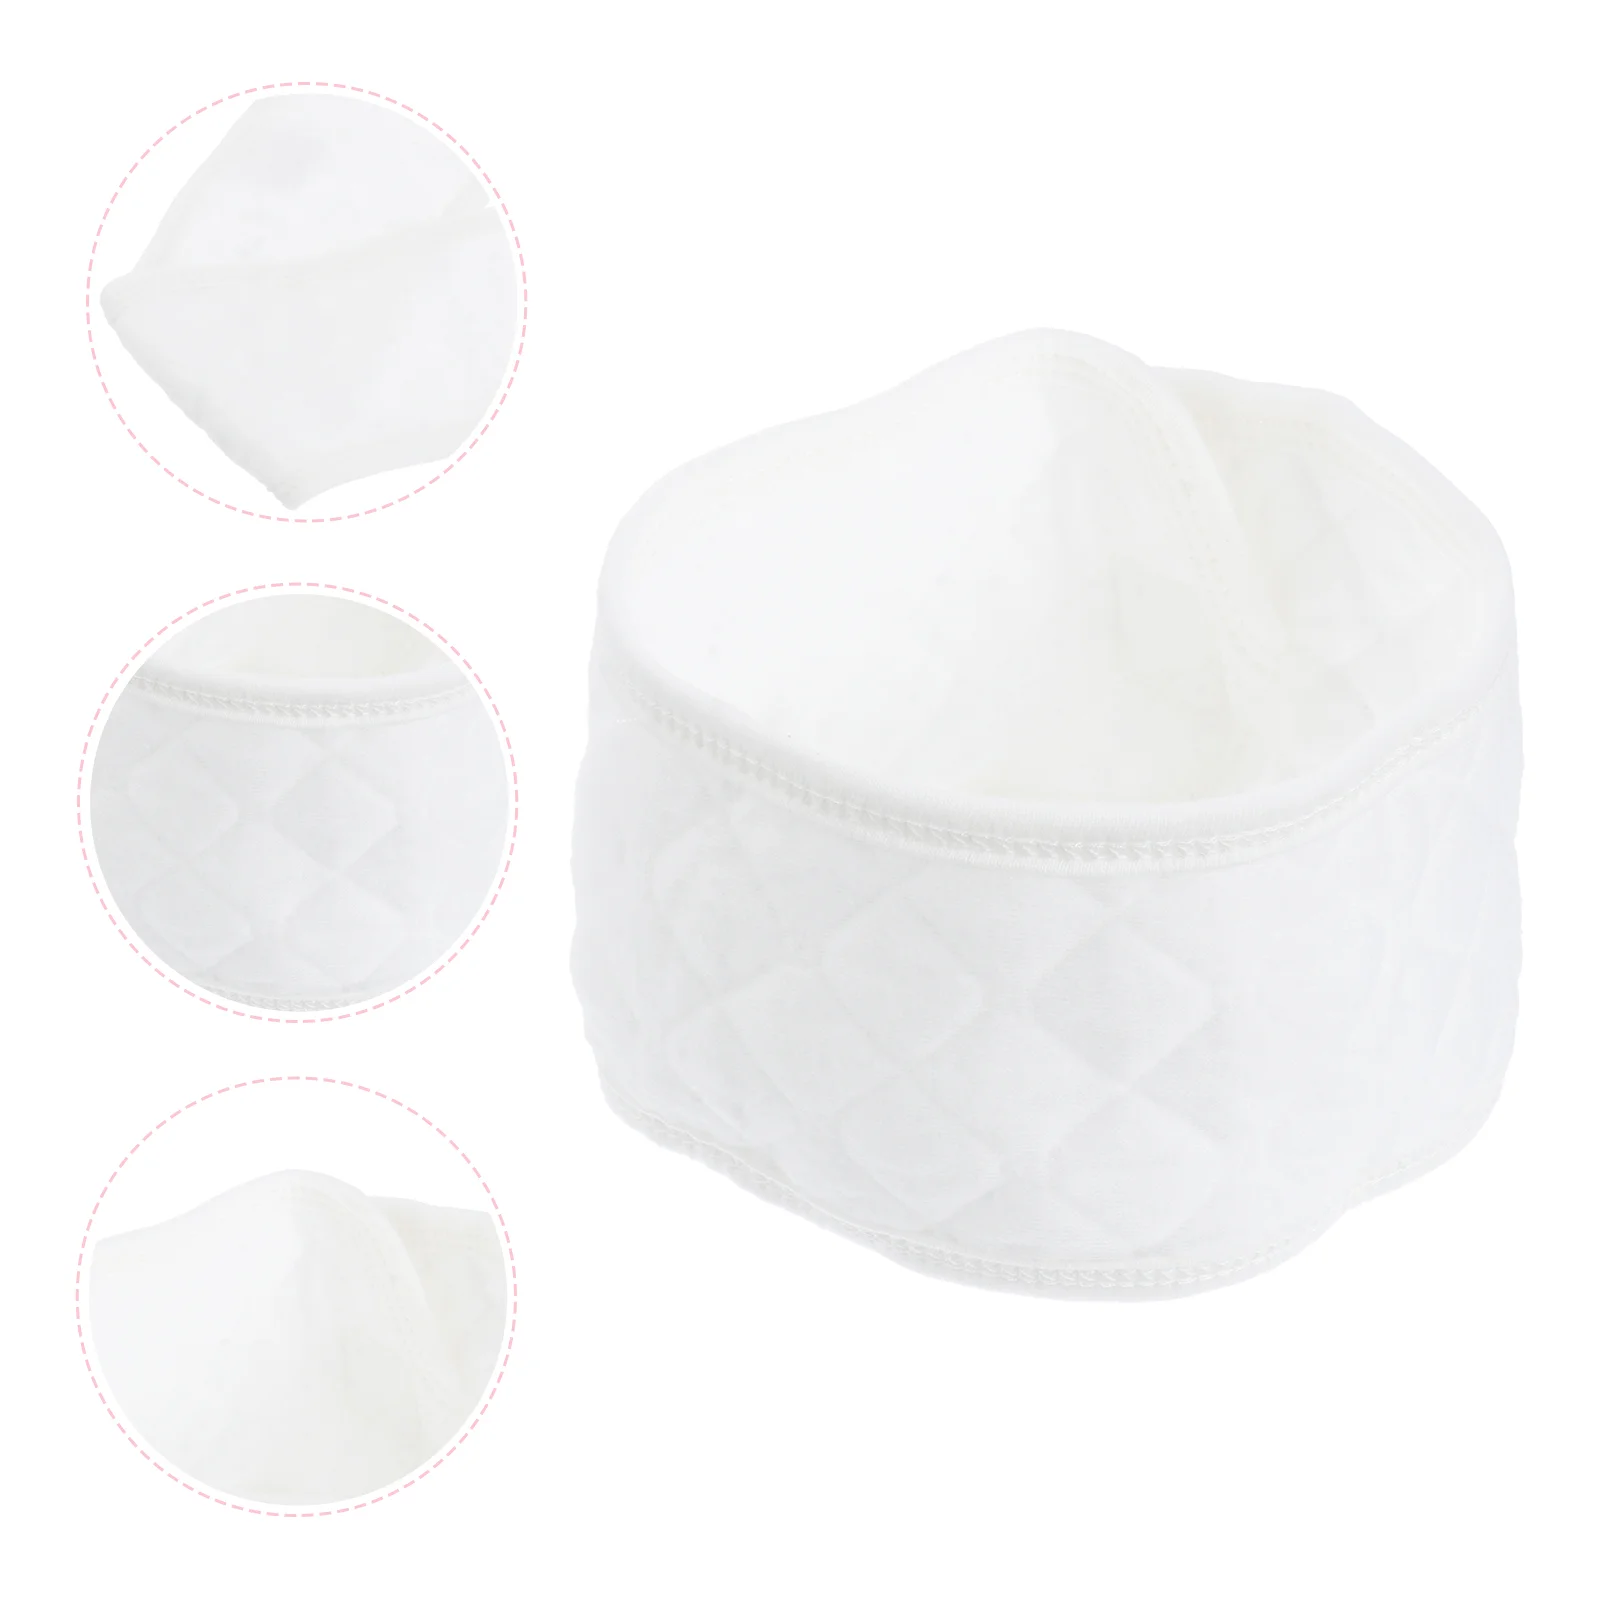 10 Pcs Newborn Umbilical Cord Infant Navel Belt Hernia Cotton Baby Belly Button Band